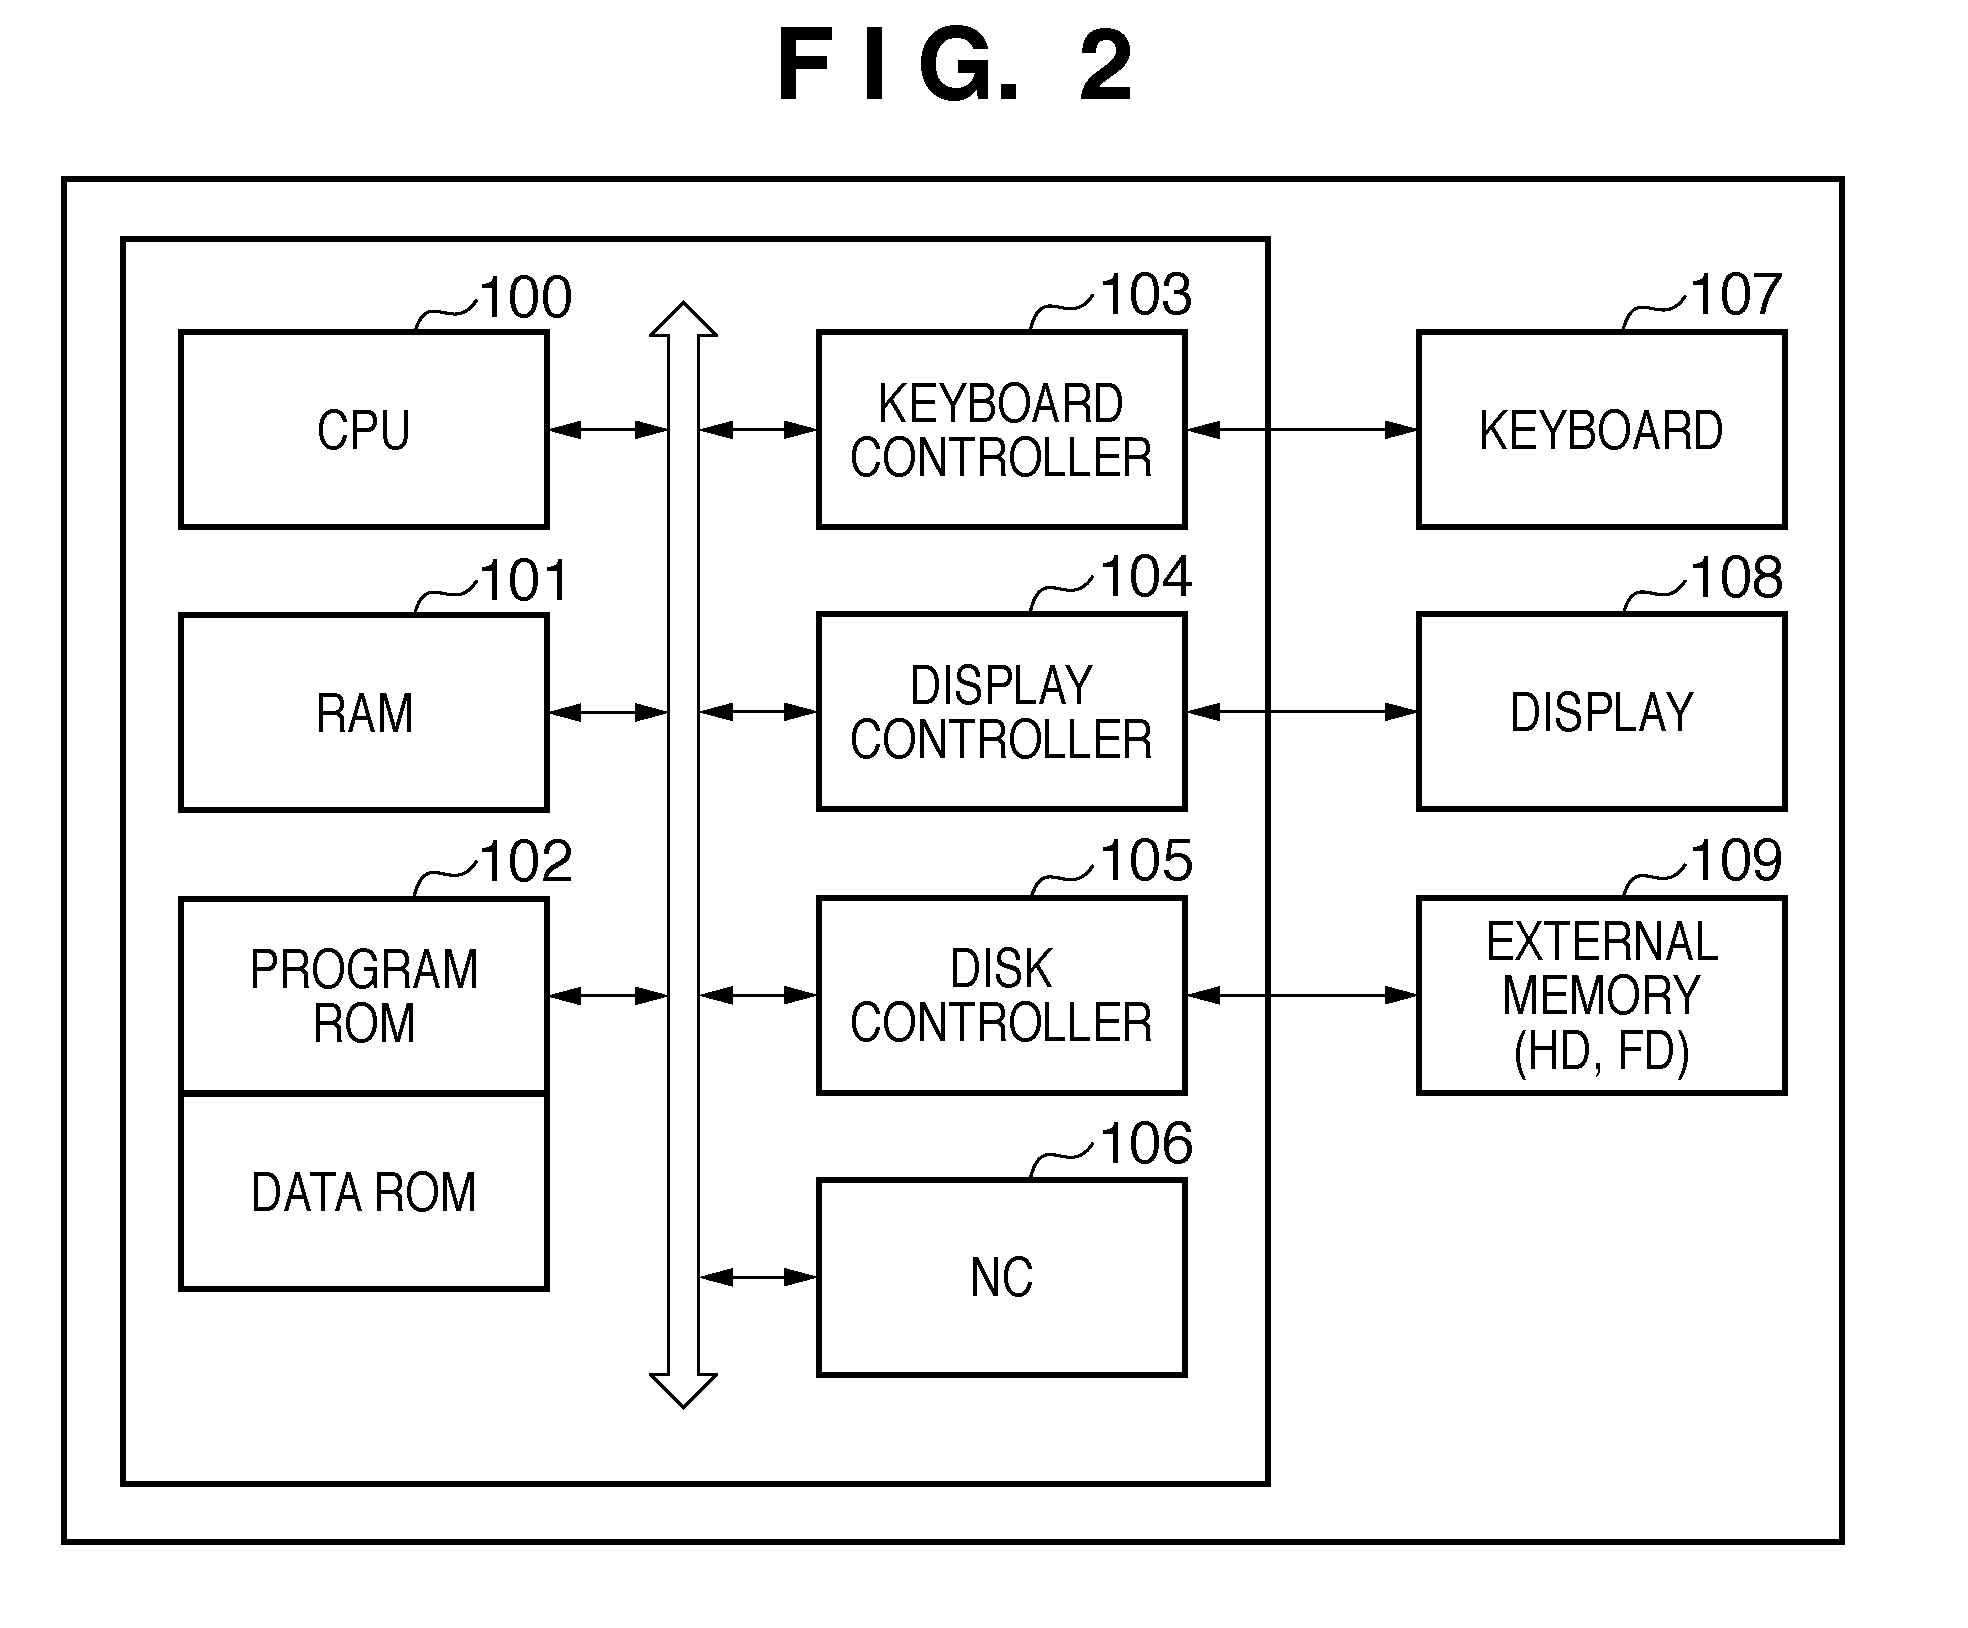 Image processing apparatus and control method for temporarily releasing a function restriction under a set condition